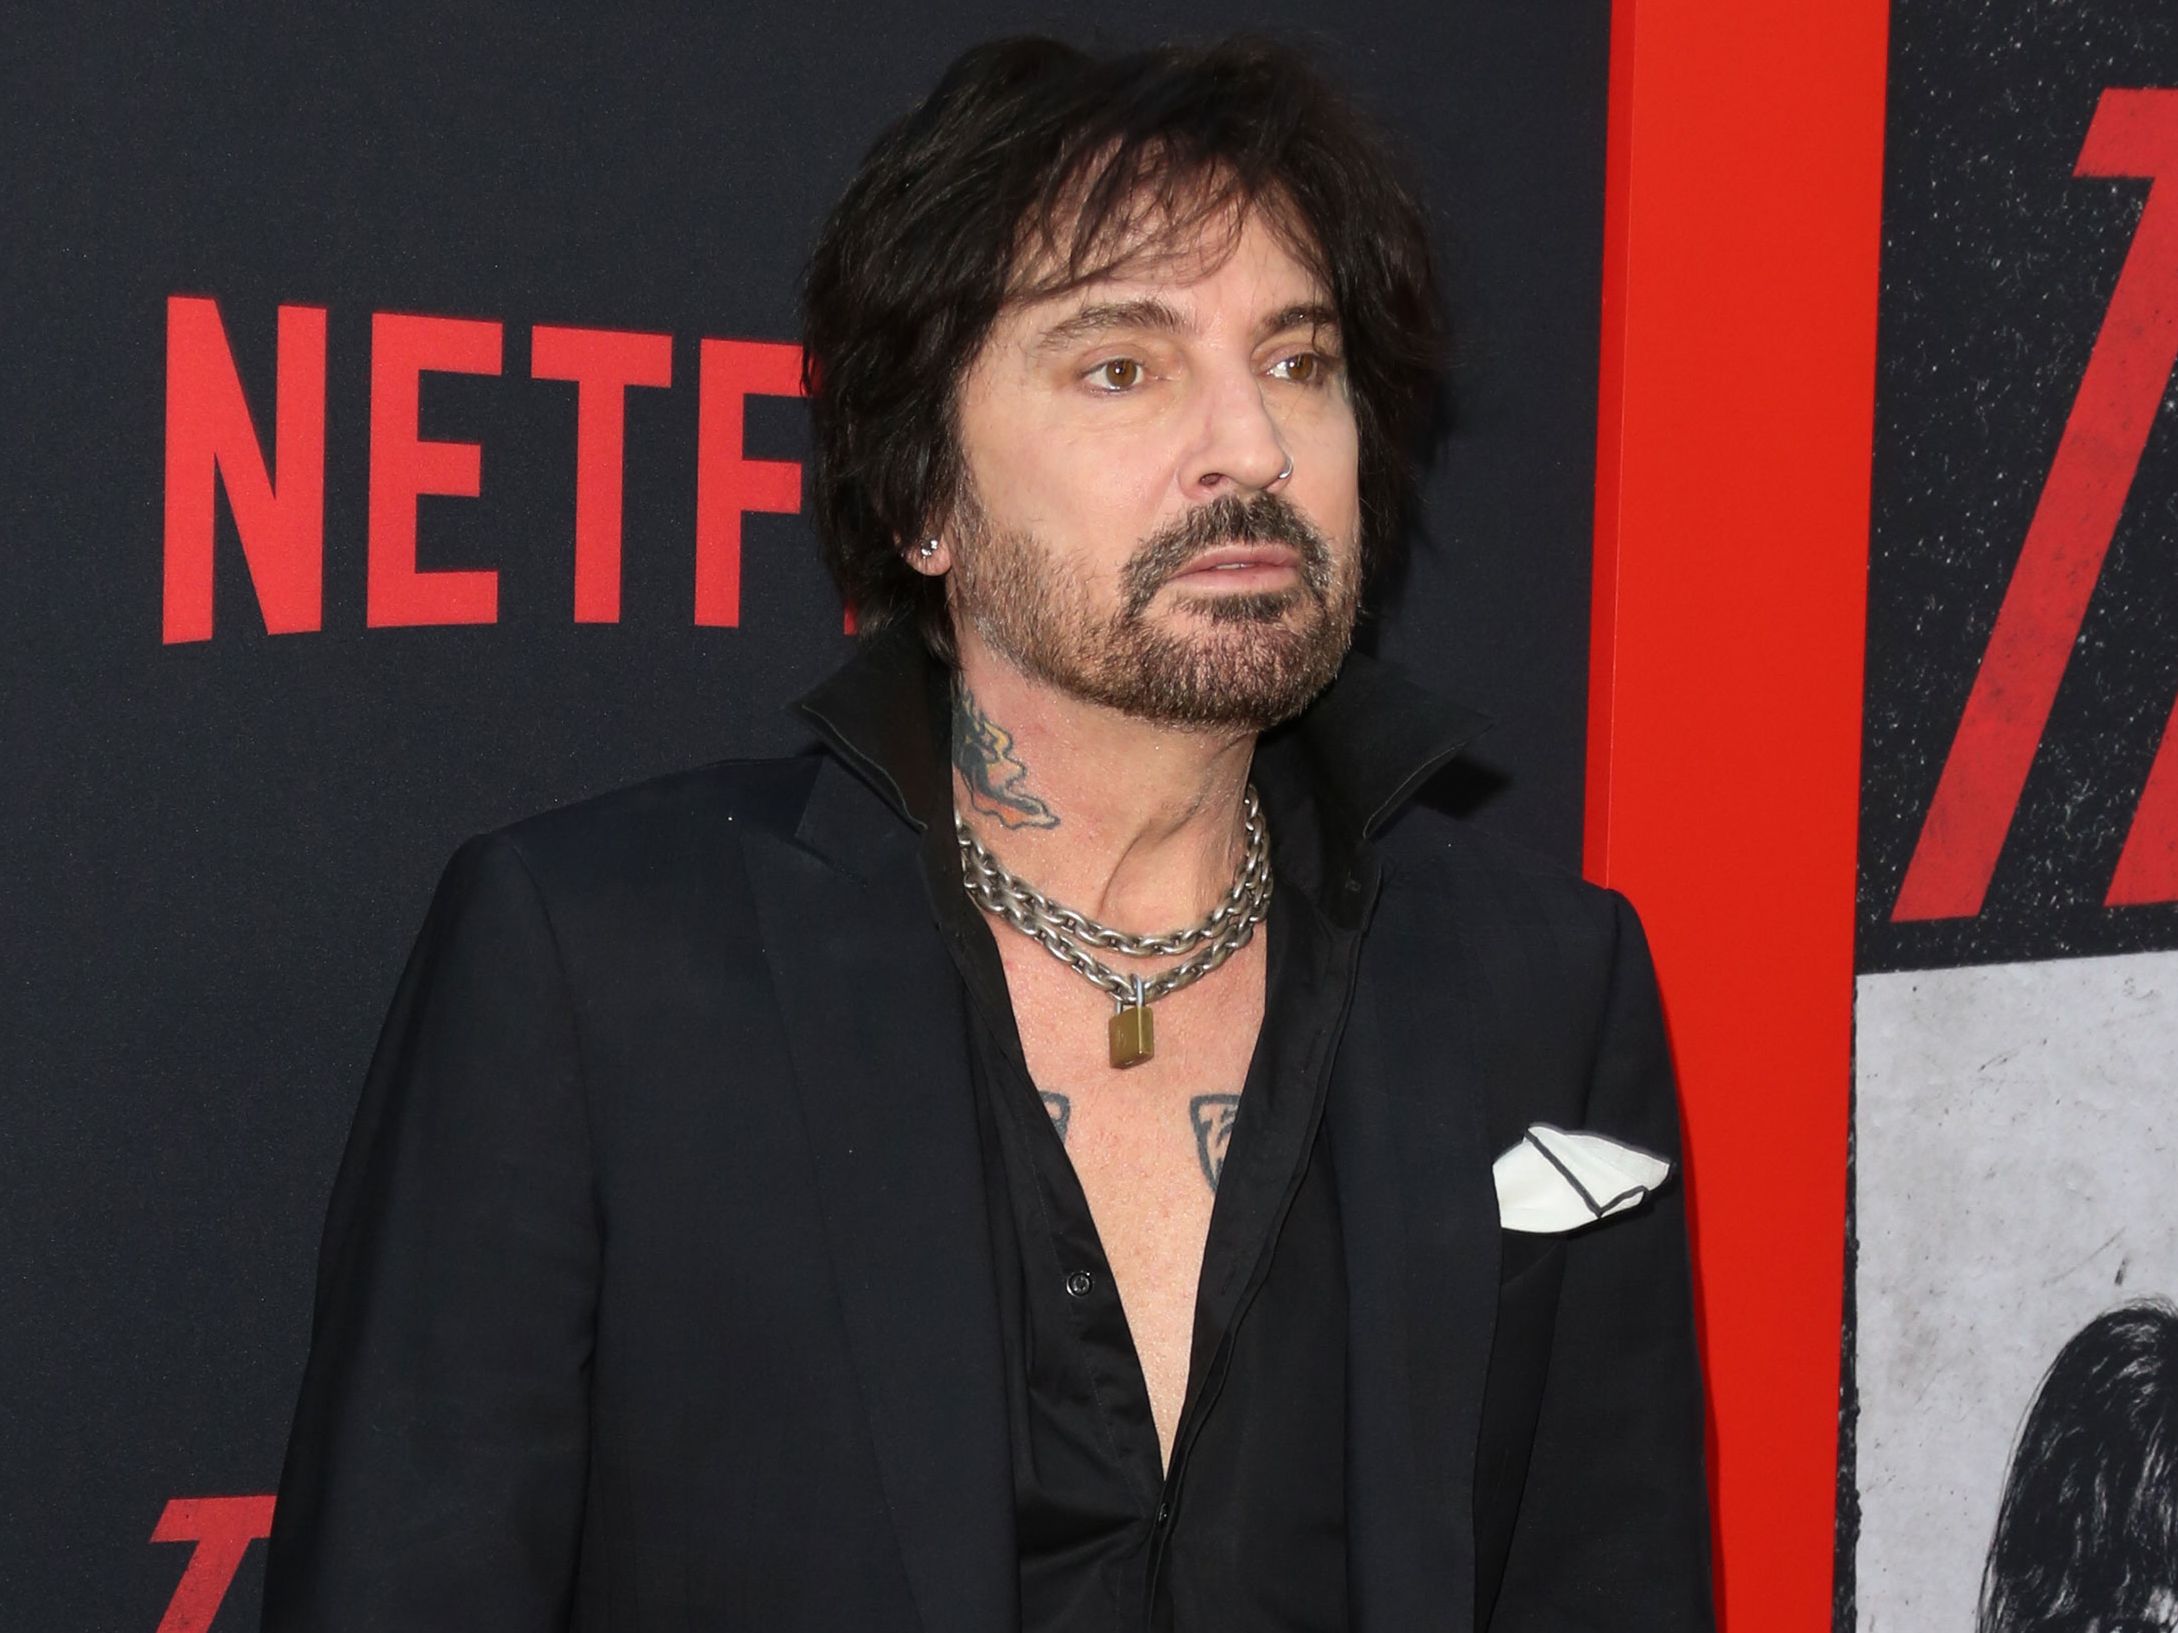 Tommy Lee's nude photo sparks accusations of double standards | CNN